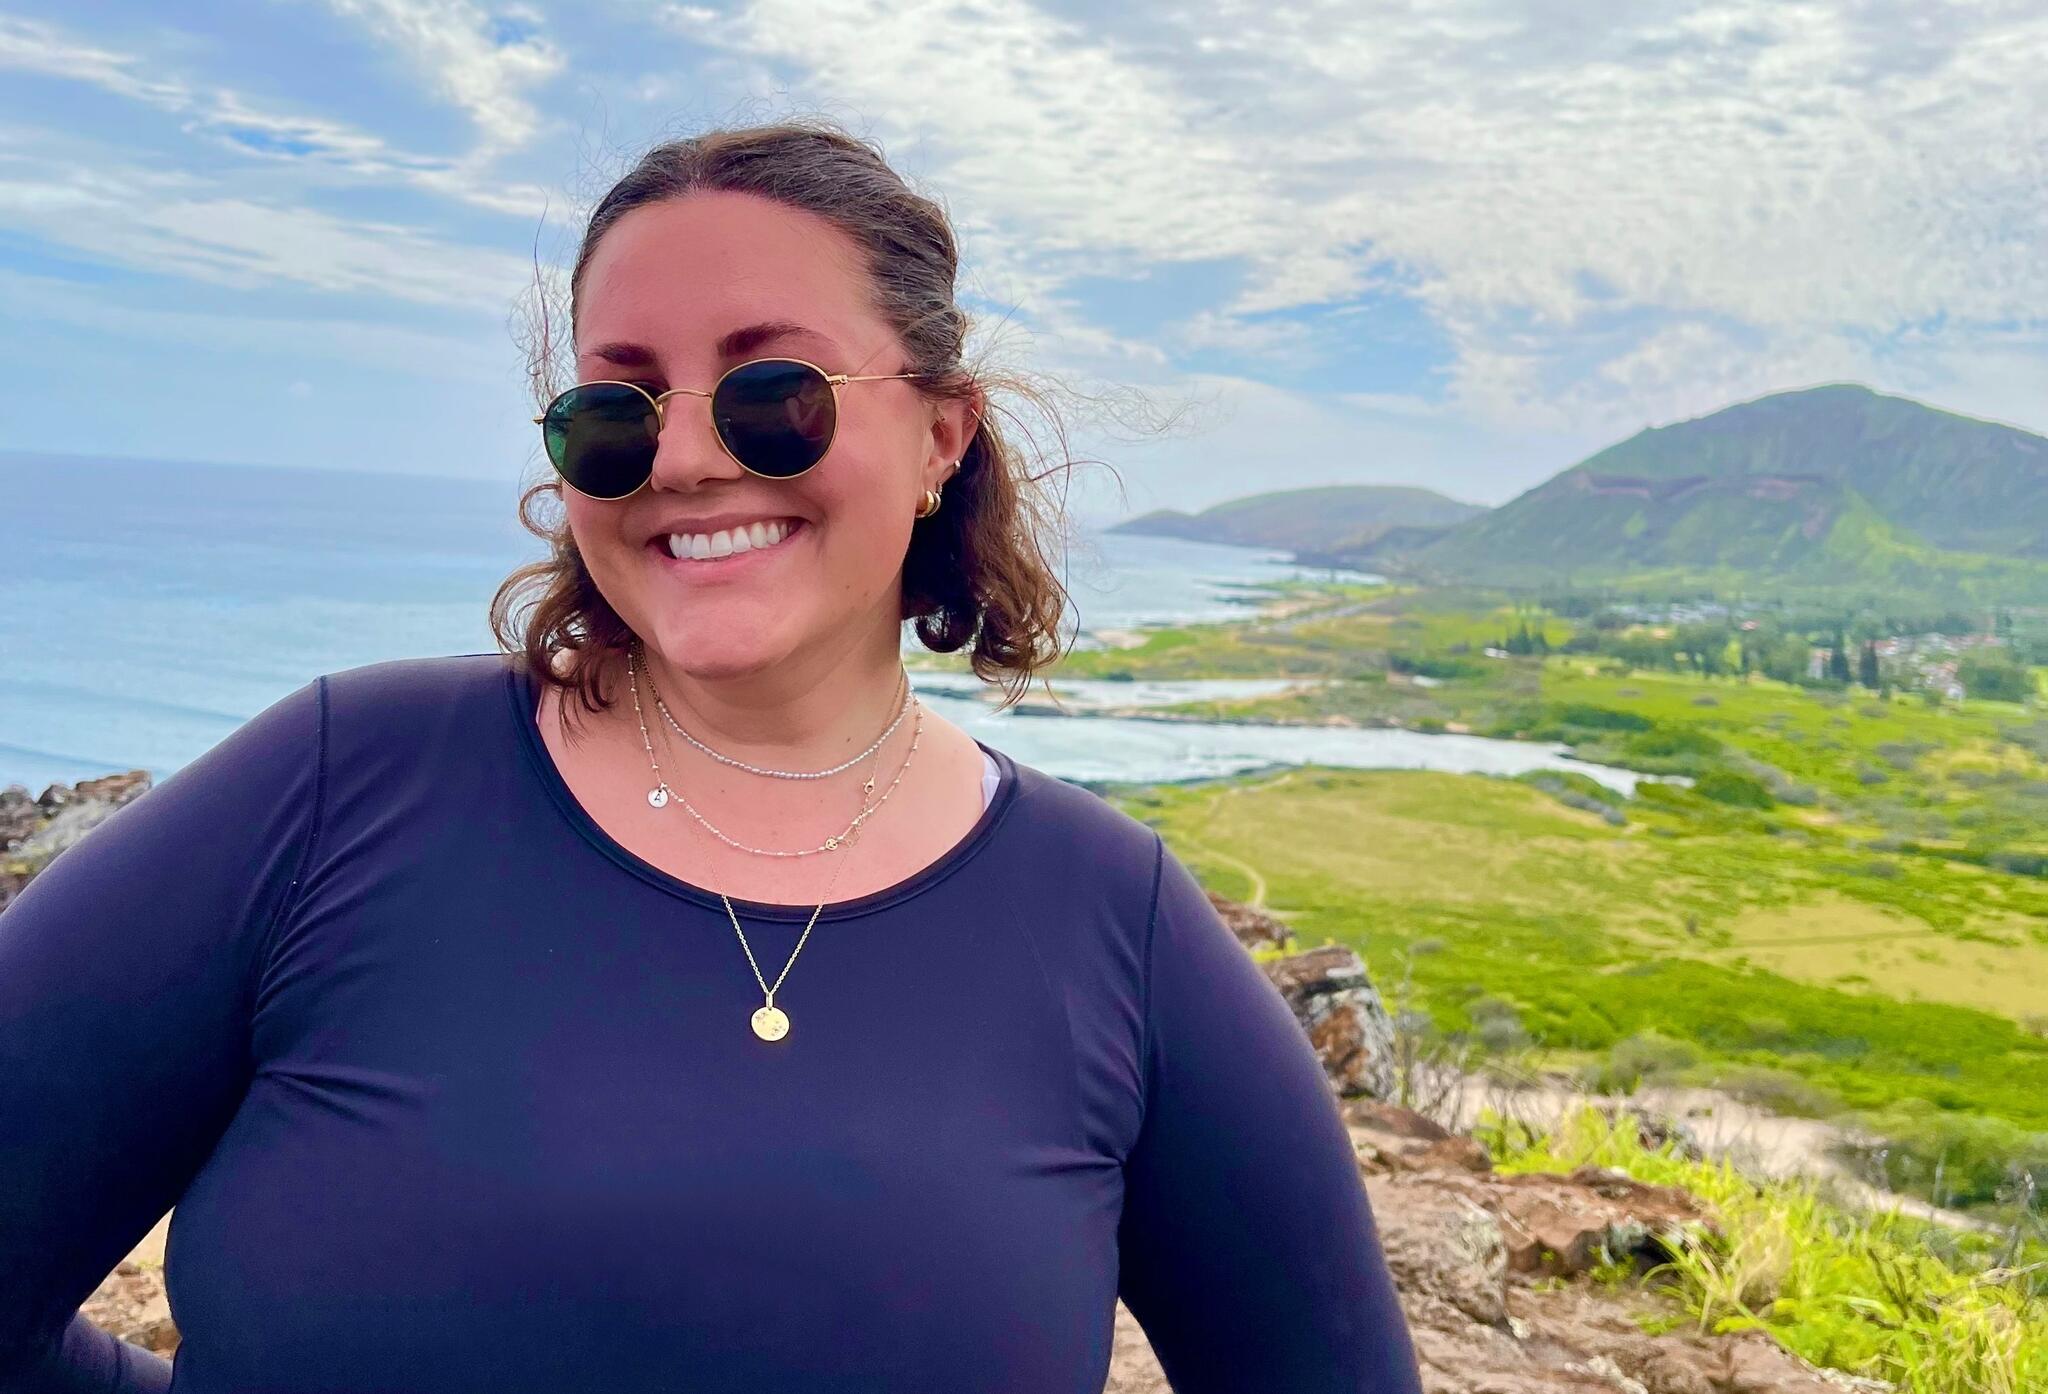 Amy Newnham in Hawaii while on AltPrac